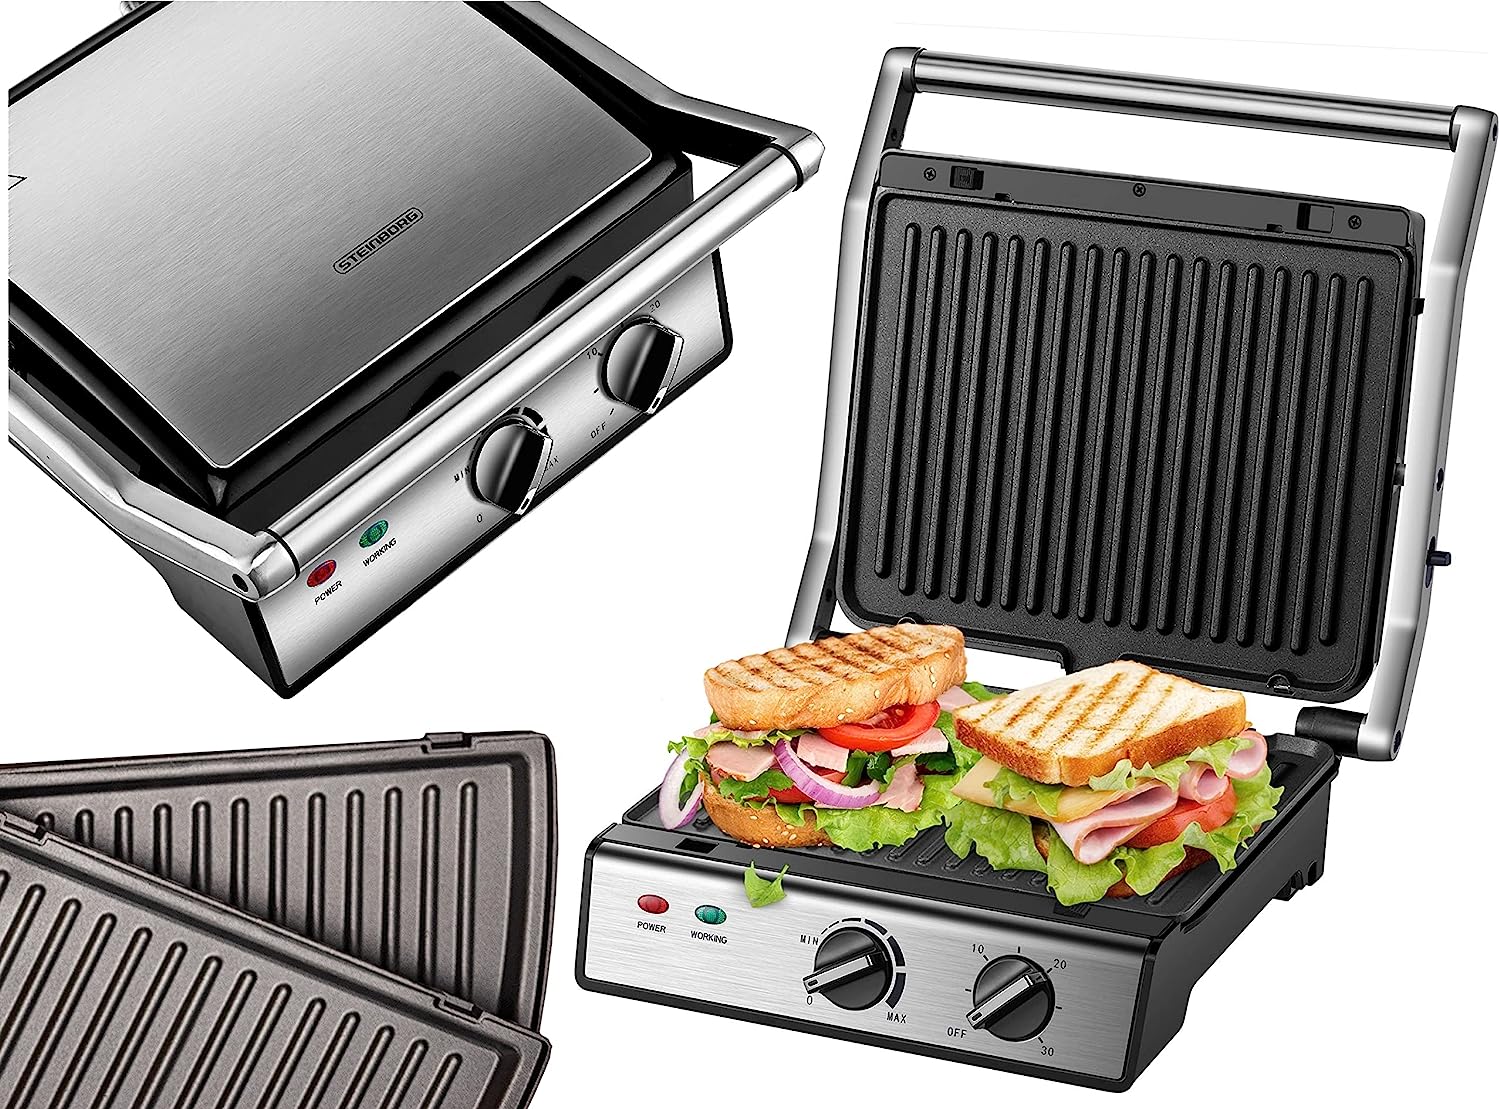 XXL Contact Grill Removable Plates 30 Minute Timer Panini Toaster Sandwich Toaster Electric Table Grill Contact Grill for Sandwiches, Steak and Panini Grill Electric Grill